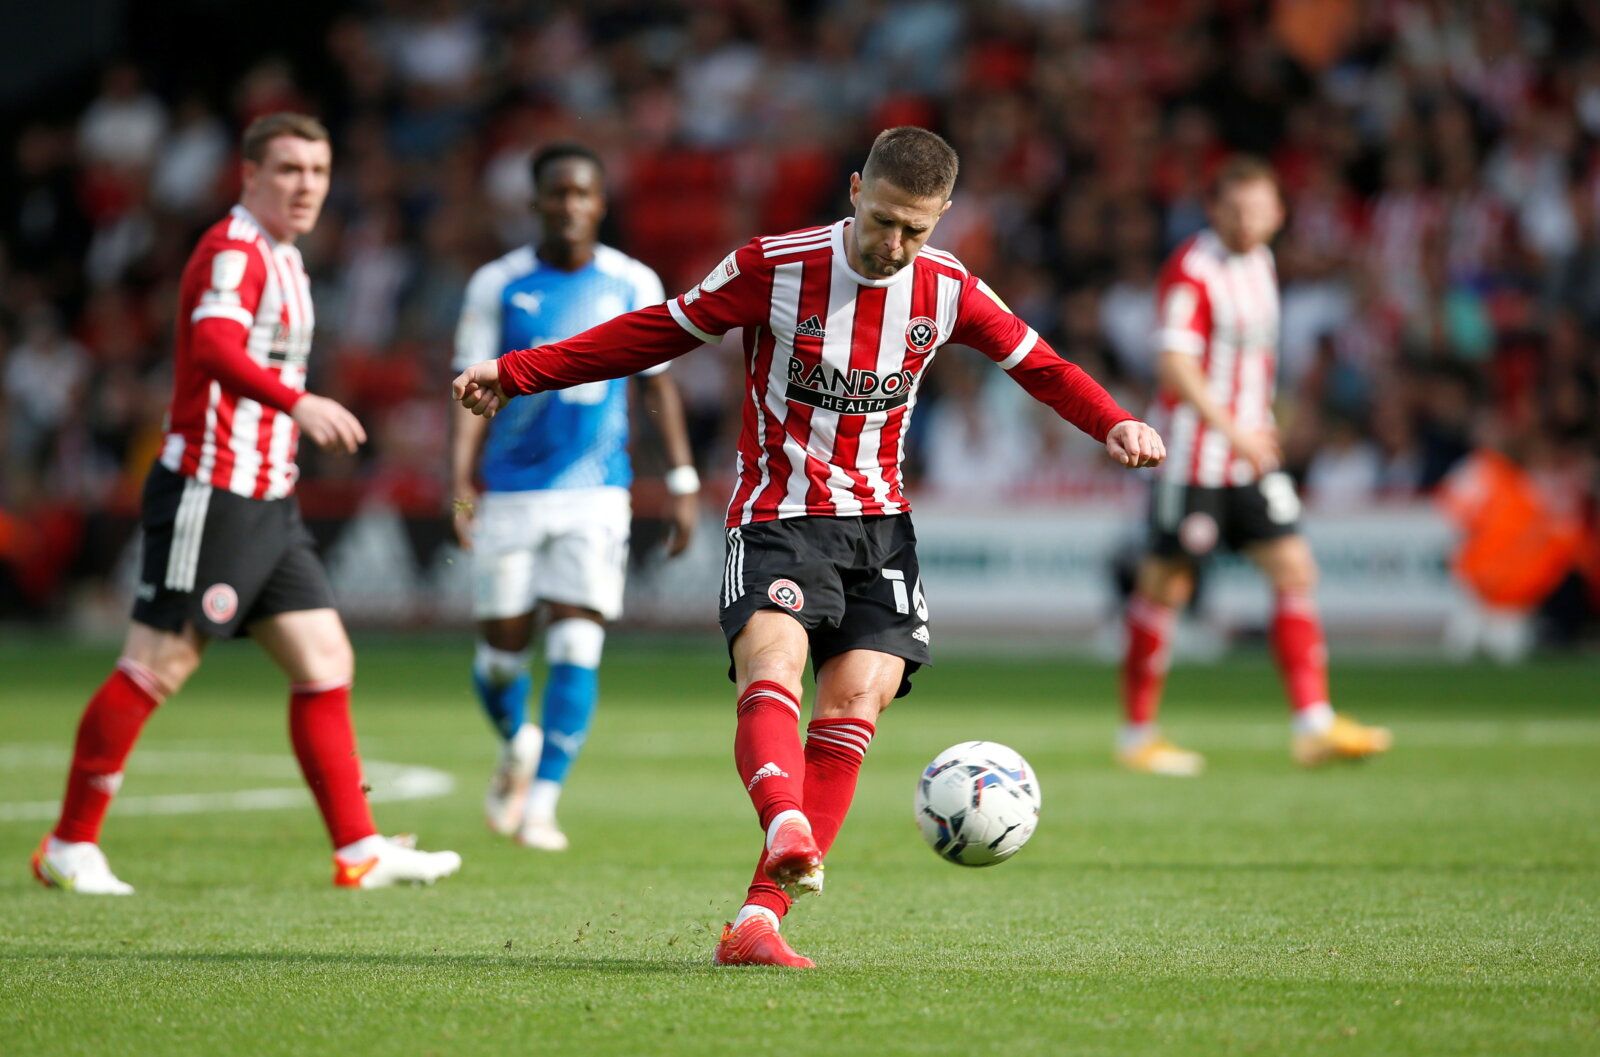 Soccer Football - Championship - Sheffield United v Peterborough United - Bramall Lane, Sheffield, Britain - September 11, 2021 Sheffield United's Oliver Norwood shoots at goal  Action Images/Ed Sykes  EDITORIAL USE ONLY. No use with unauthorized audio, video, data, fixture lists, club/league logos or "live" services. Online in-match use limited to 75 images, no video emulation. No use in betting, games or single club/league/player publications.  Please contact your account representative for fu